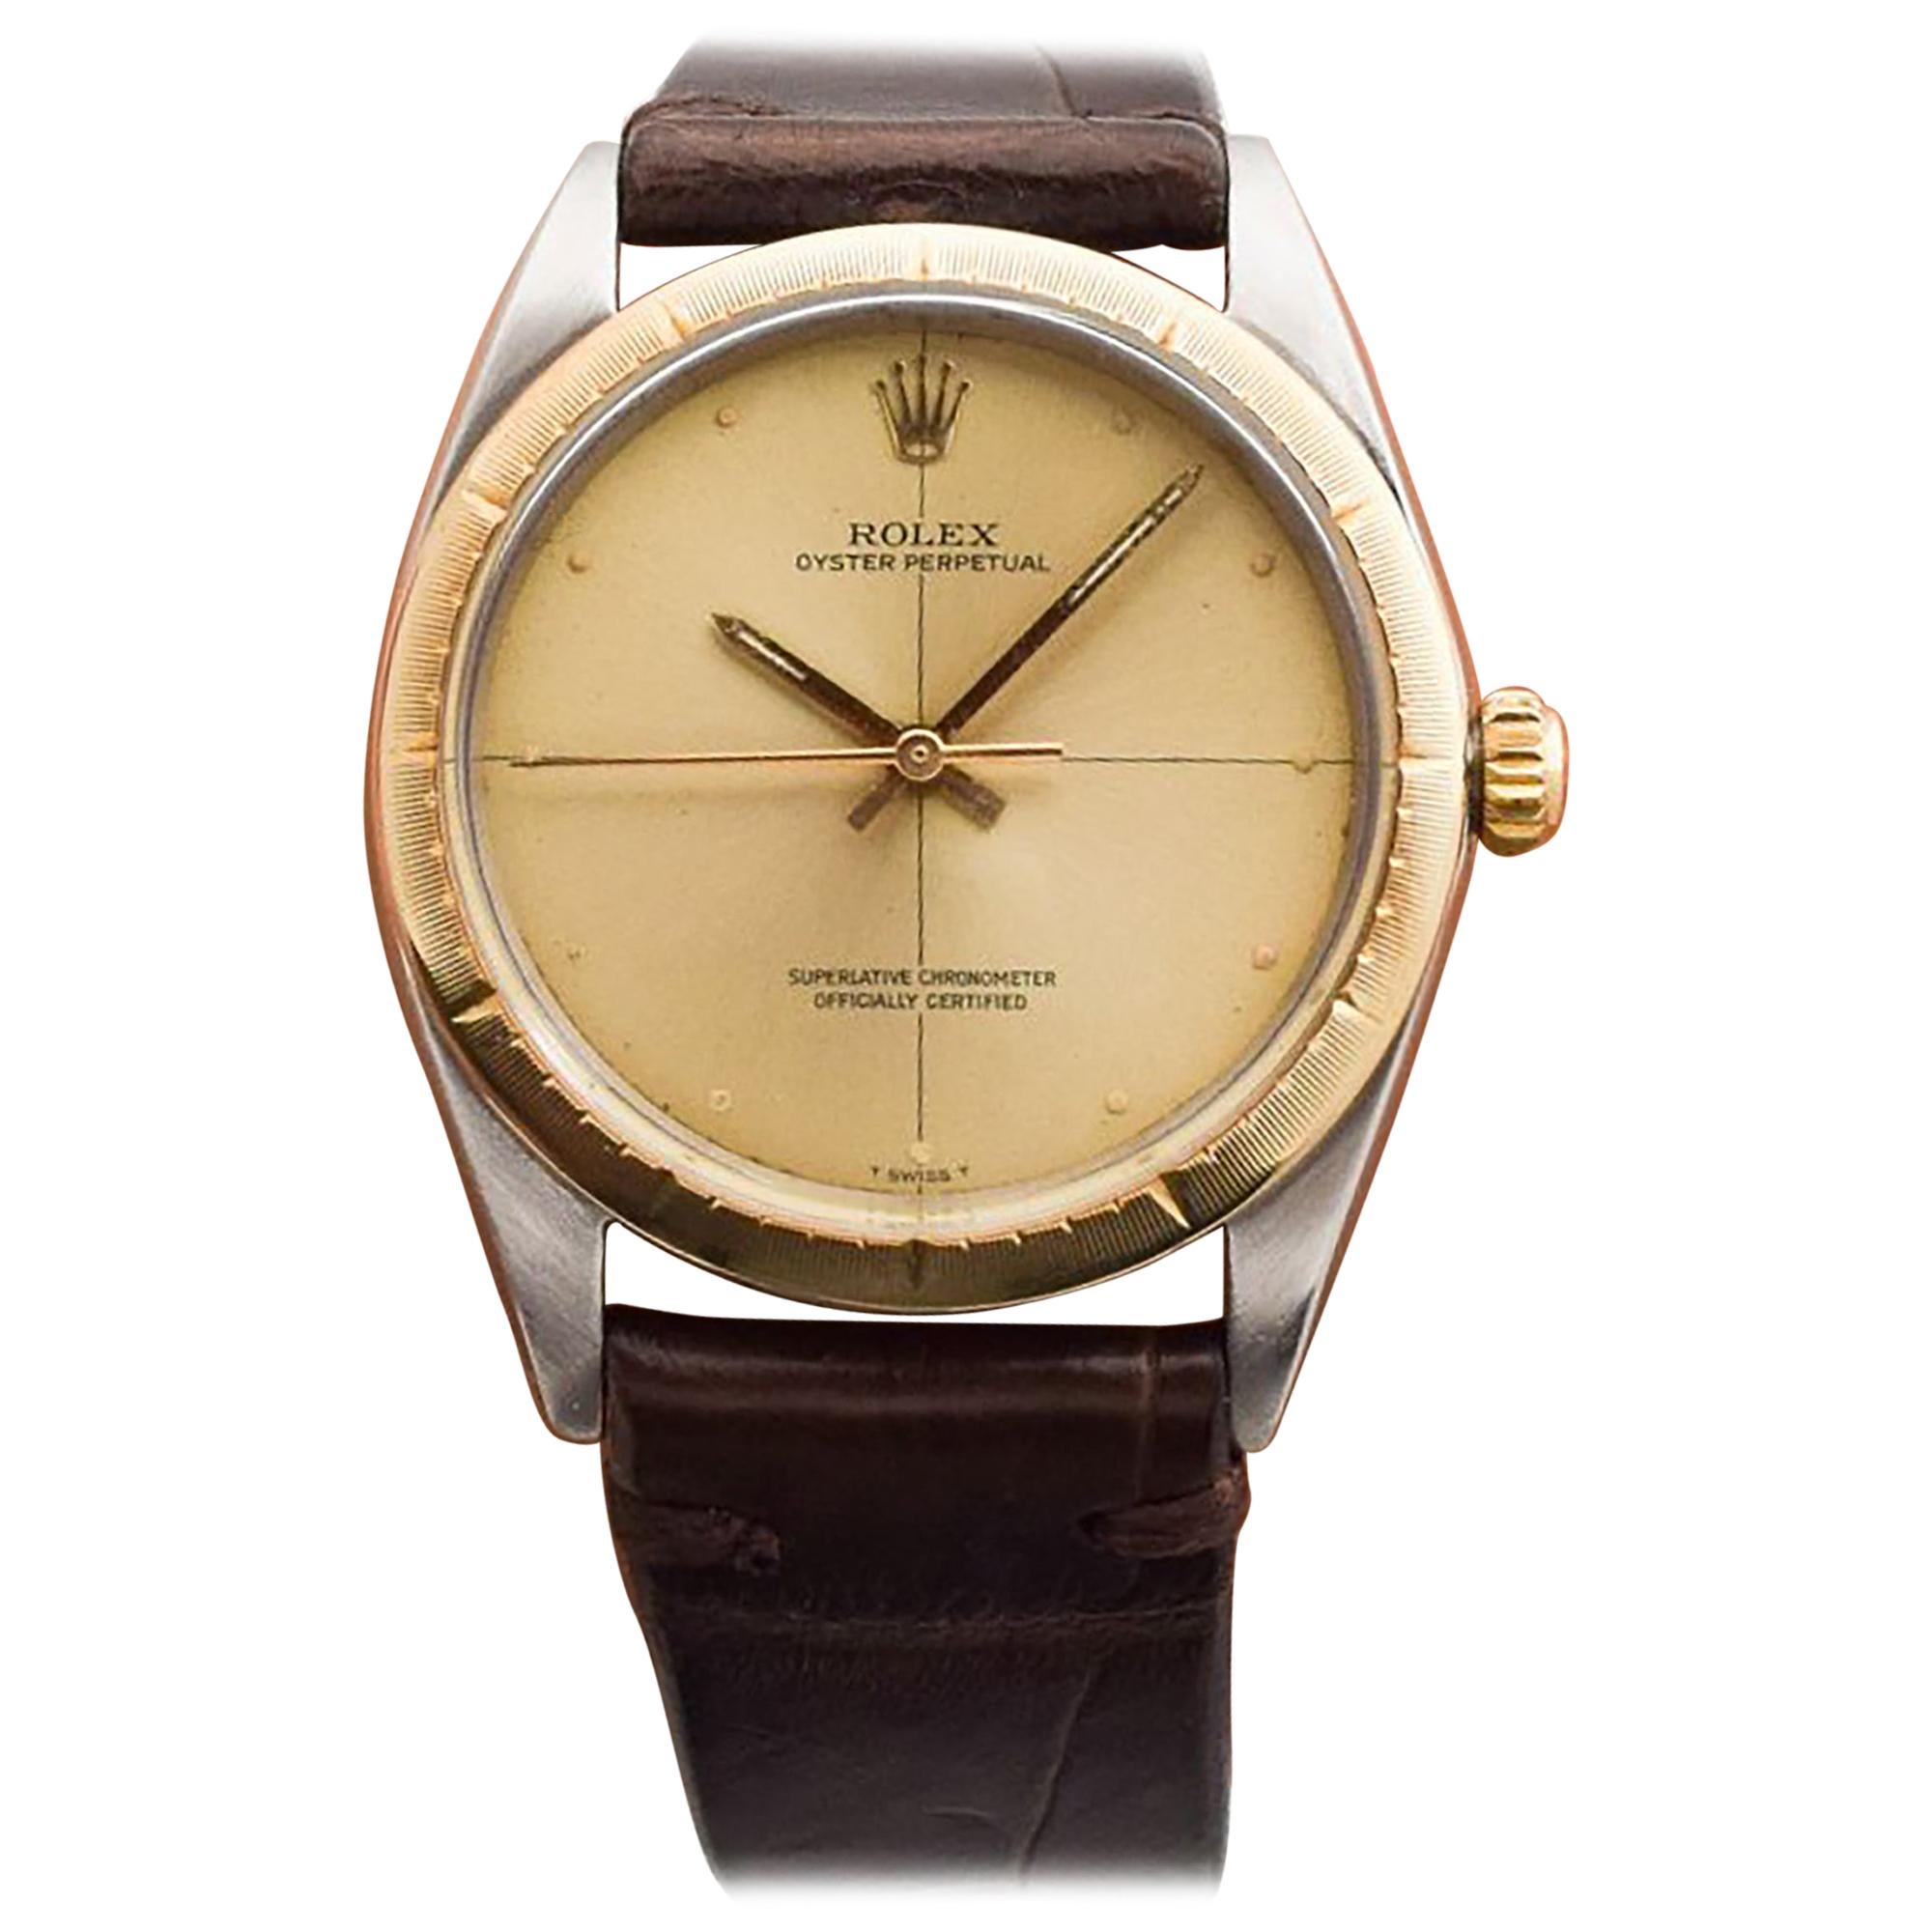 Vintage Rolex Oyster Perpetual Zephyr Two-Tone Watch, 1965 For Sale